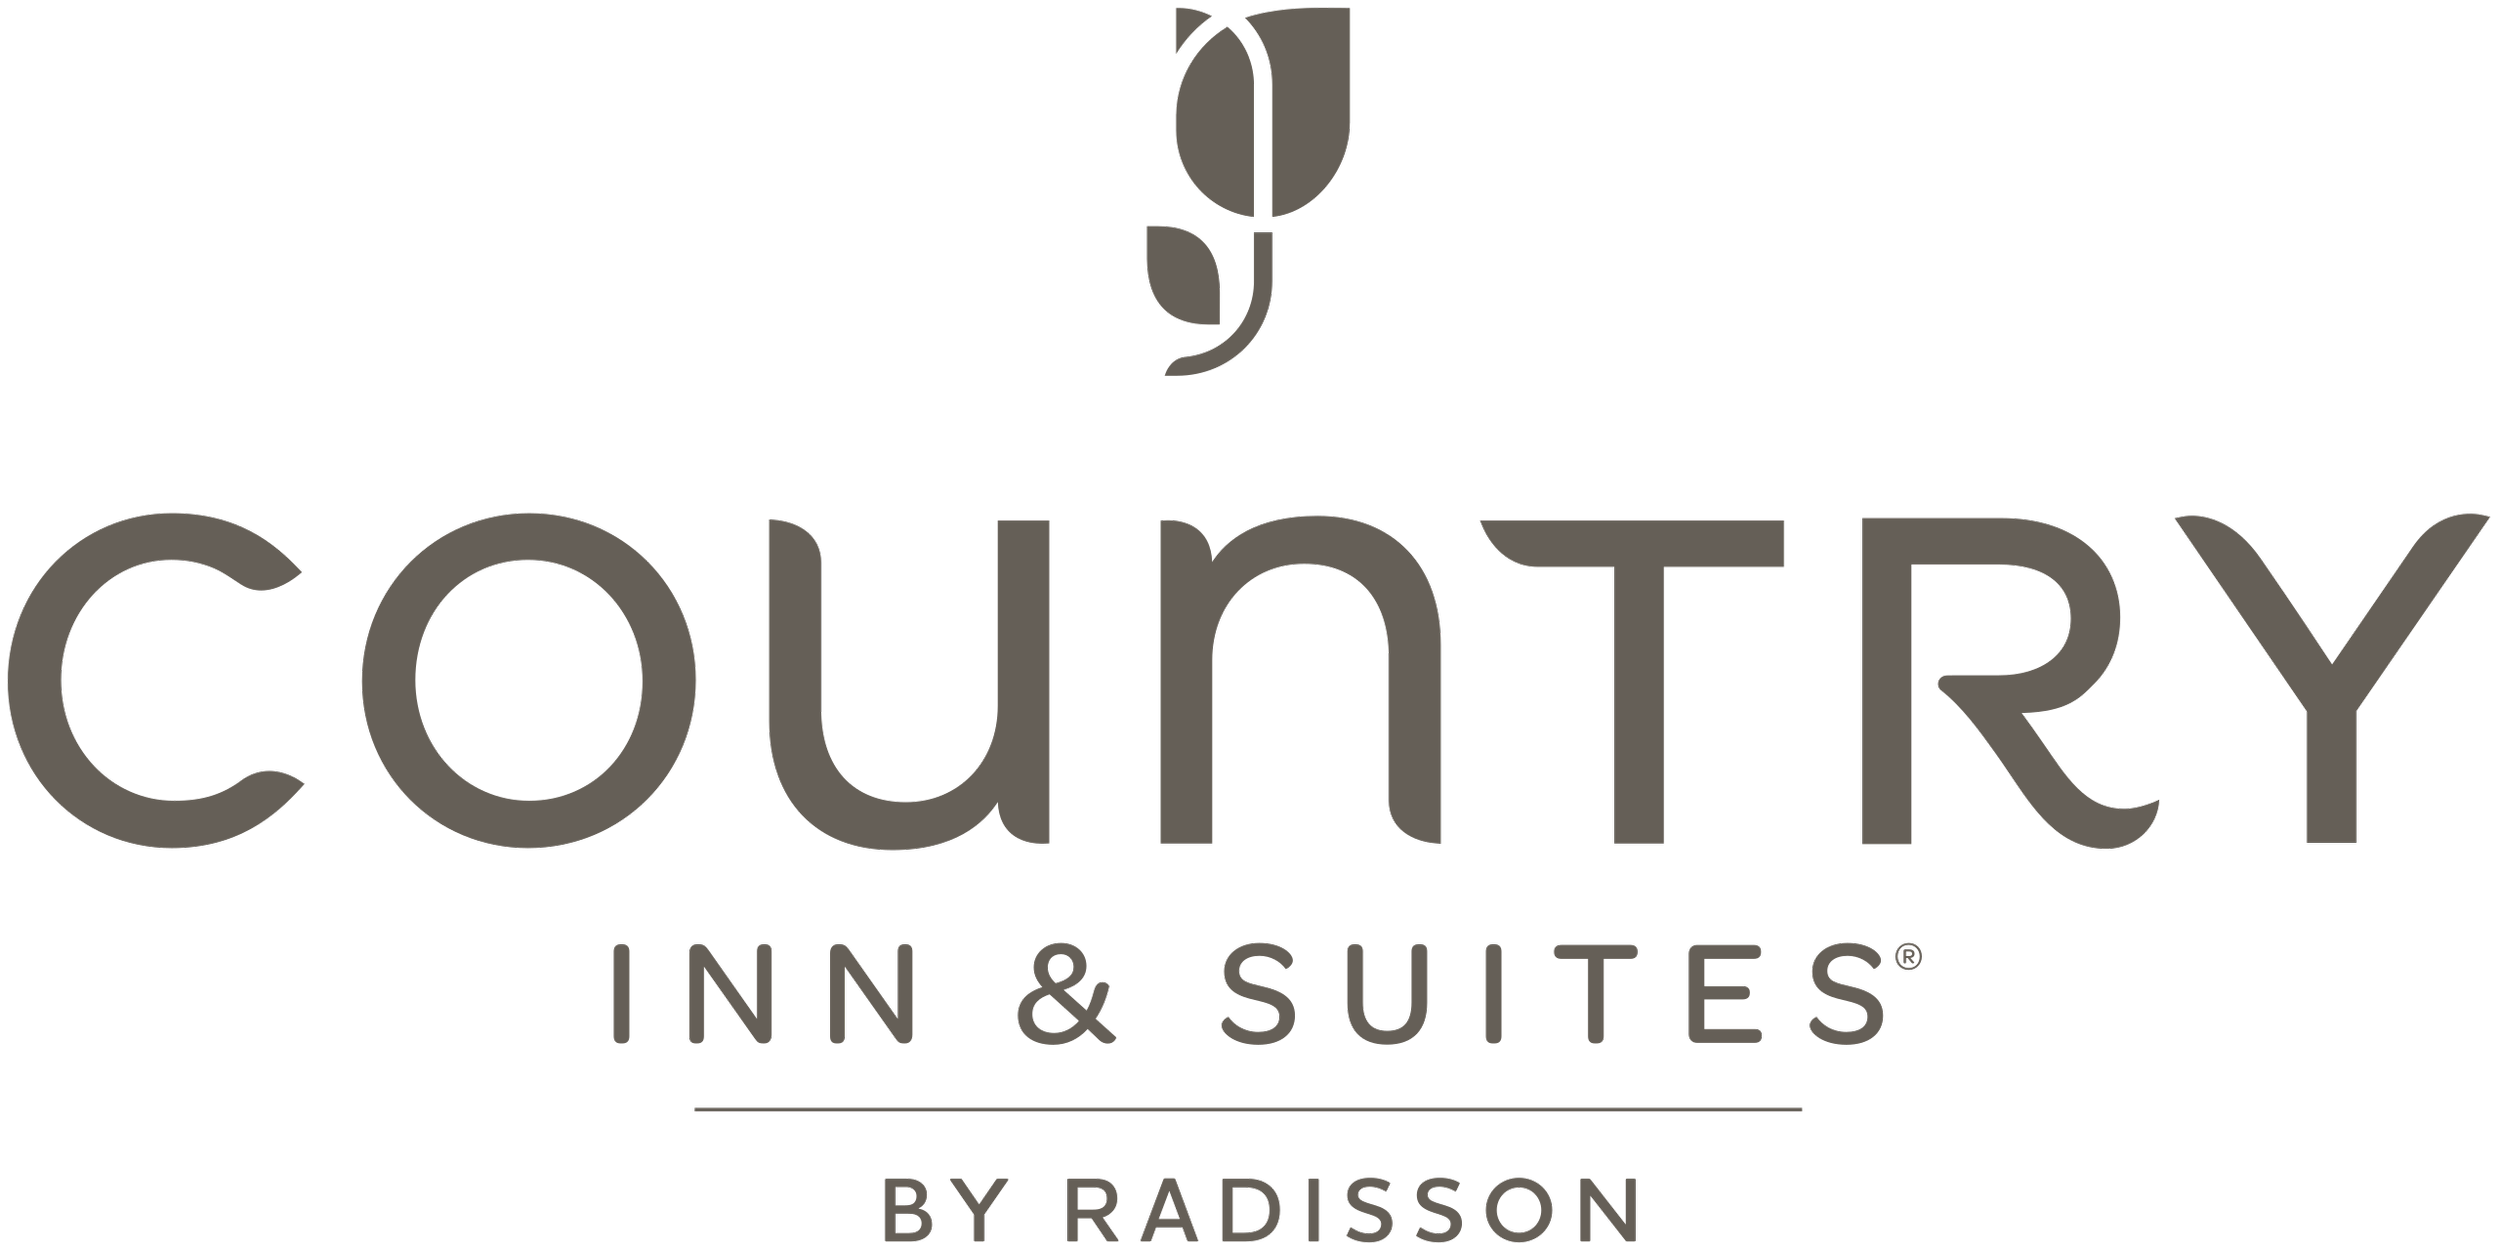 Country_Inn___Suites_Radisson_logo.svg.png